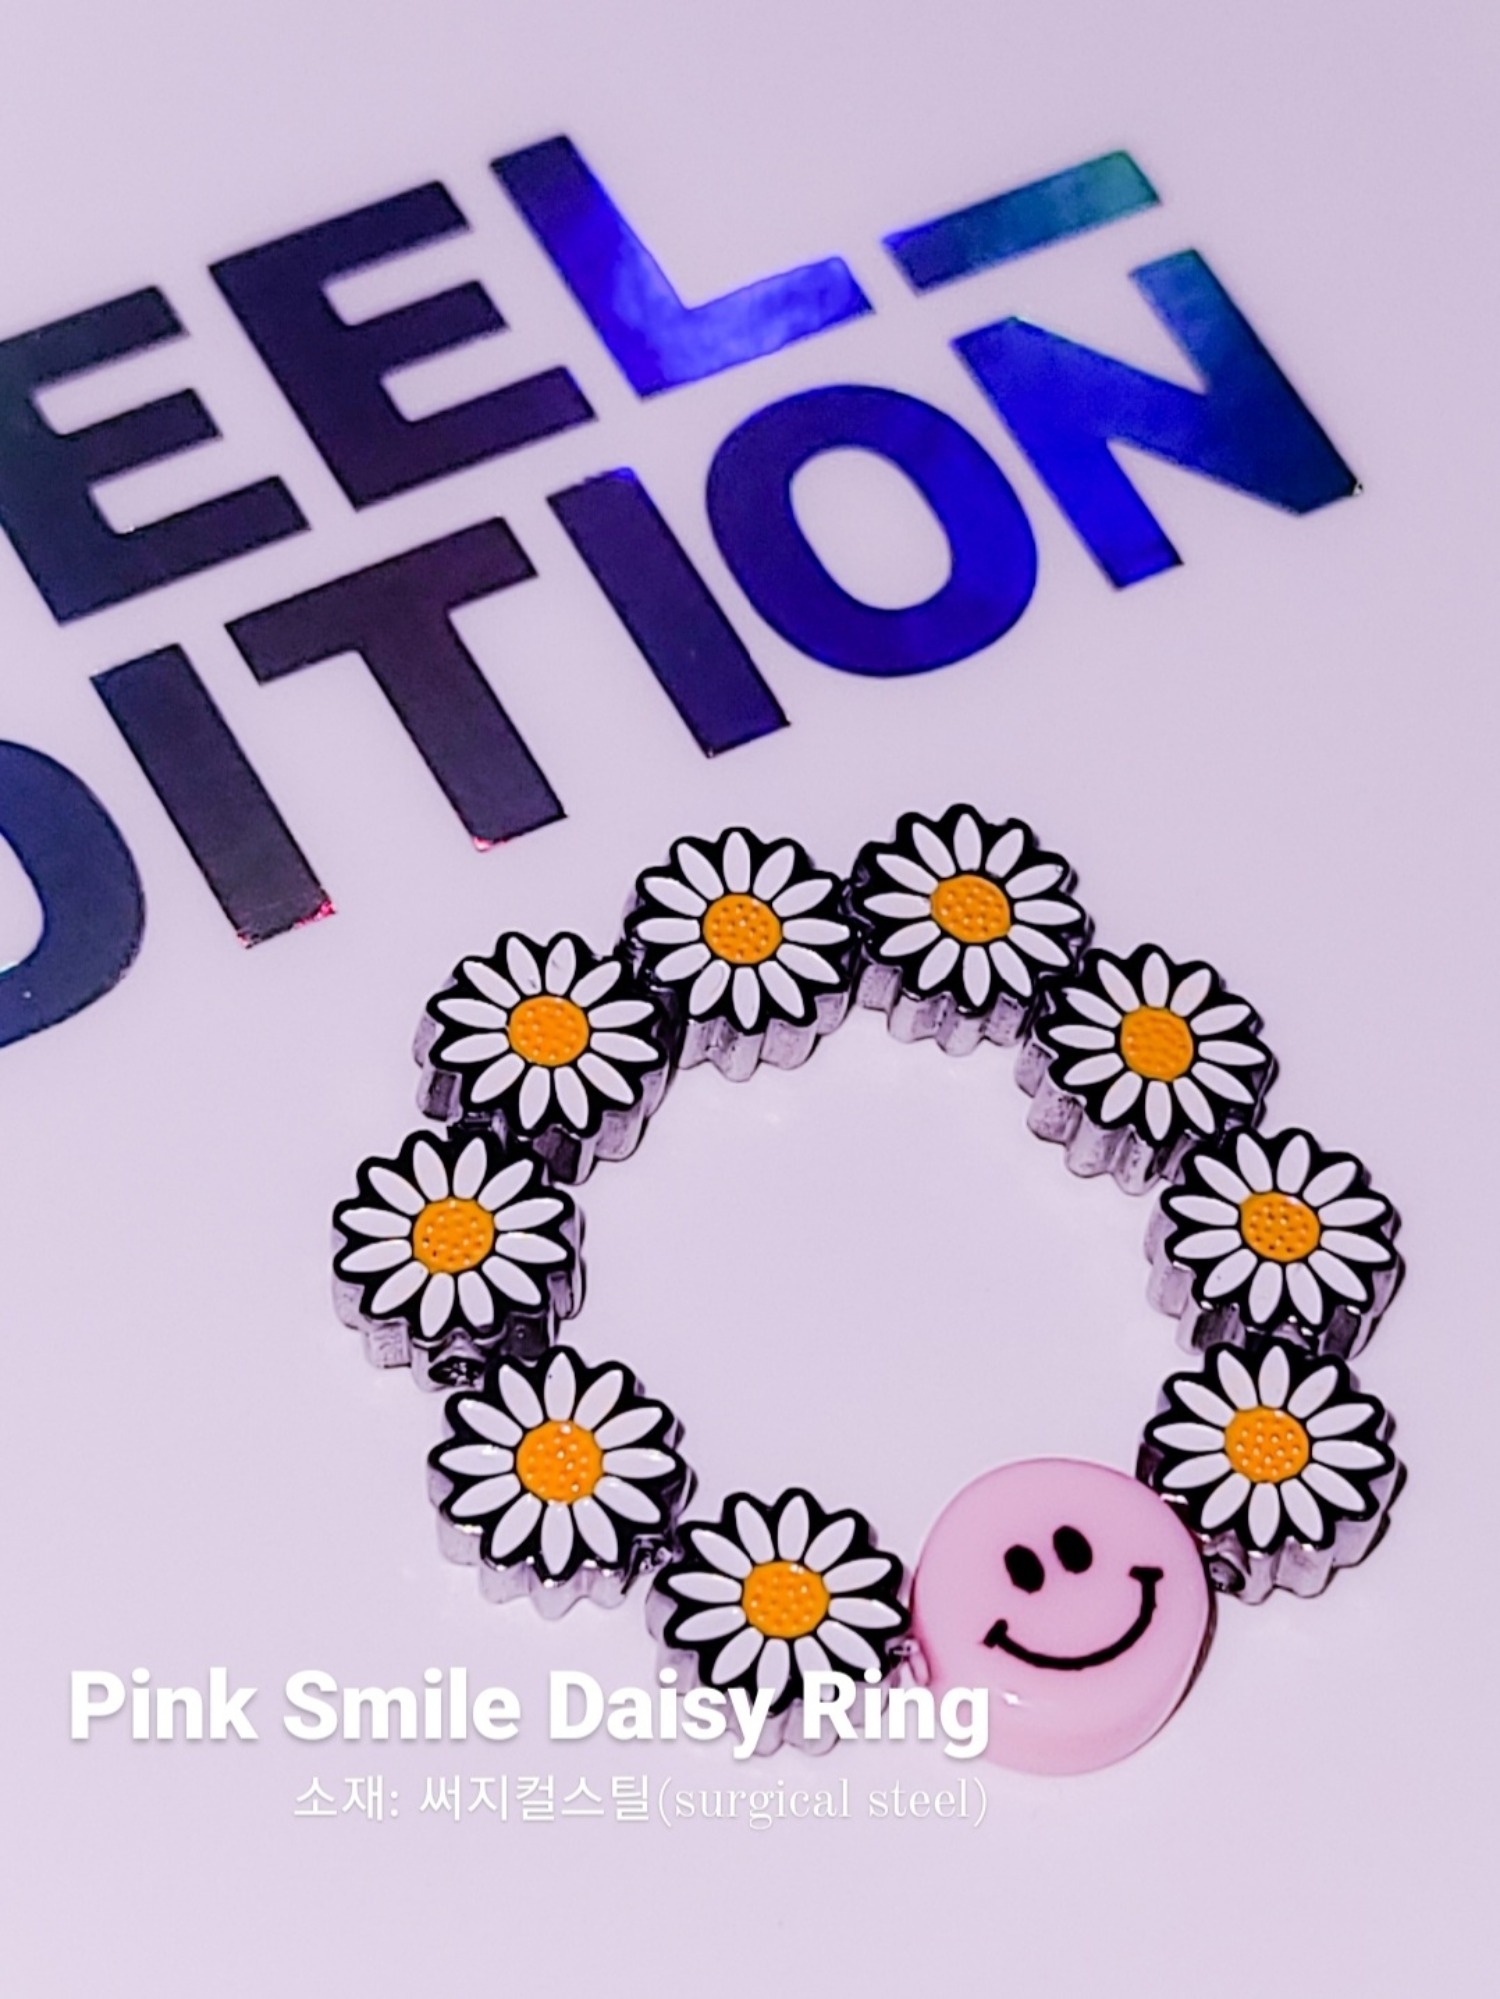 Pink Smile Daisy Ring_PINK